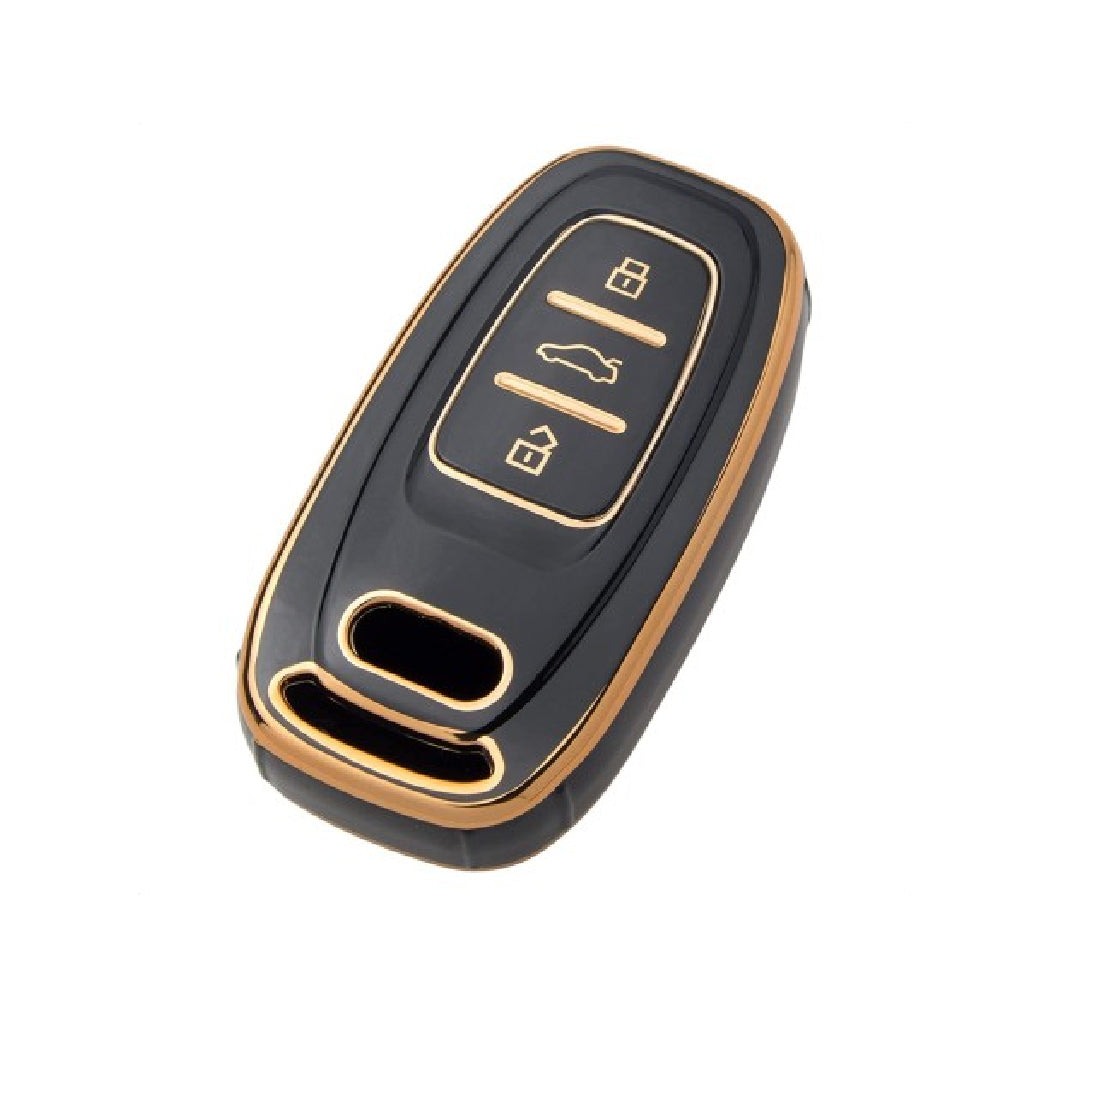 Acto TPU Gold Series Car Key Cover With Diamond Key Ring For Audi A8